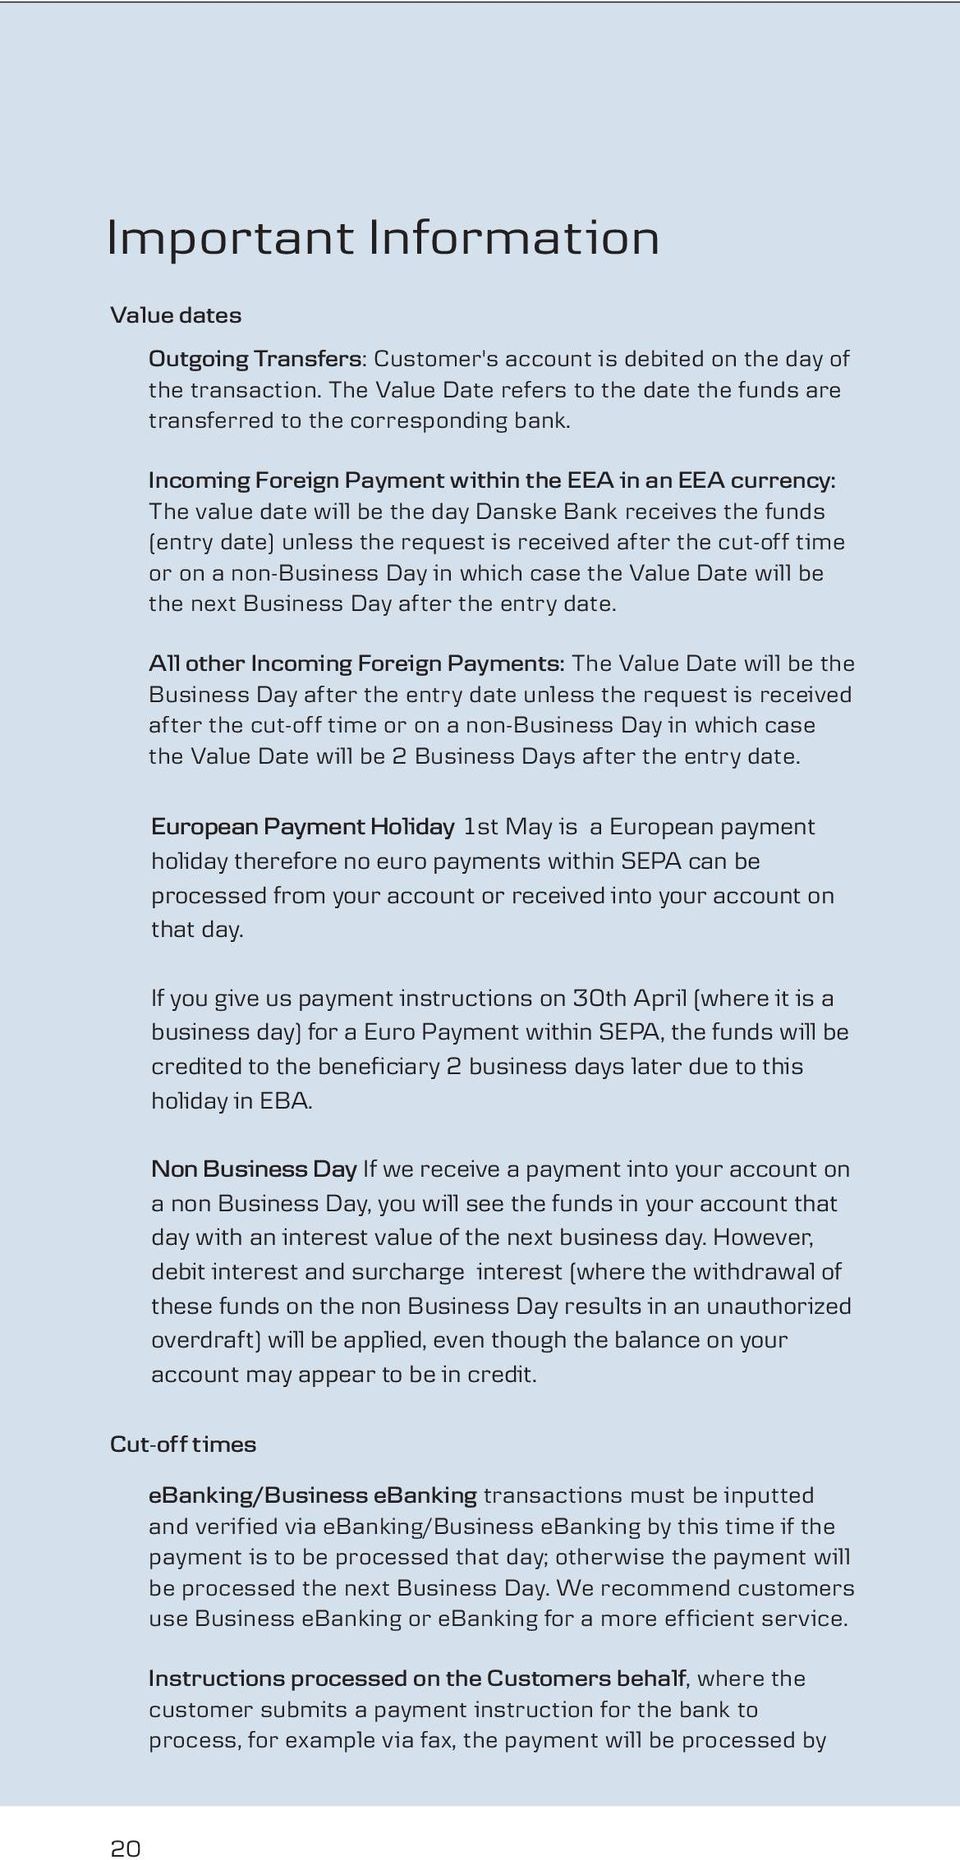 Incoming Foreign Payment within the EEA in an EEA currency: The value date will be the day Danske Bank receives the funds (entry date) unless the request is received after the cut-off time or on a